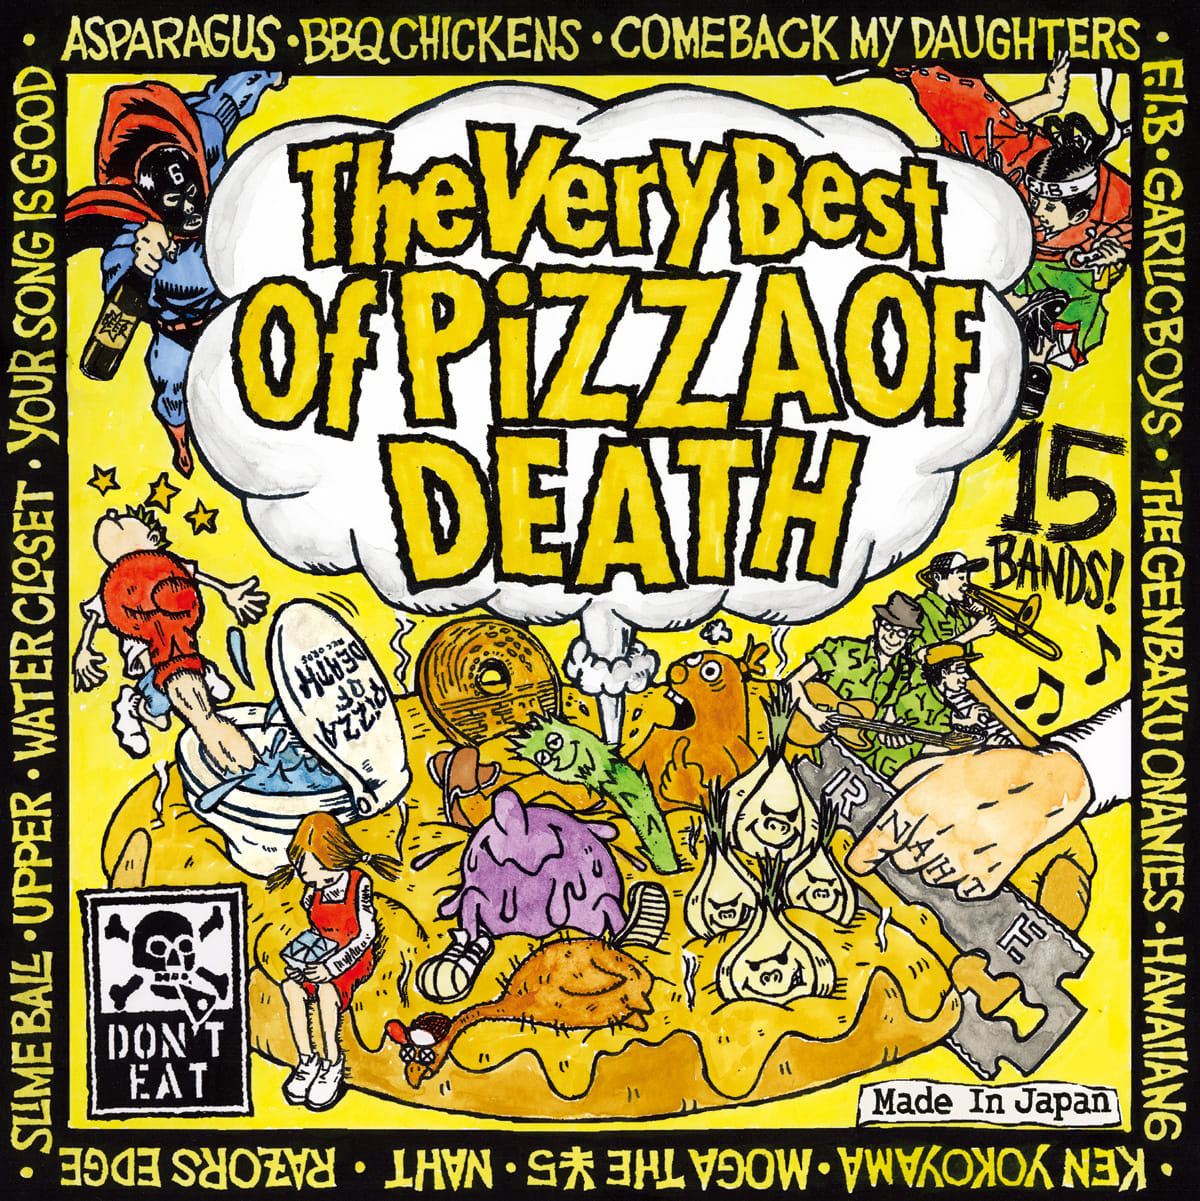 V.A / The Very Best of PIZZA OF DEATH | Ken Yokoyama(Band